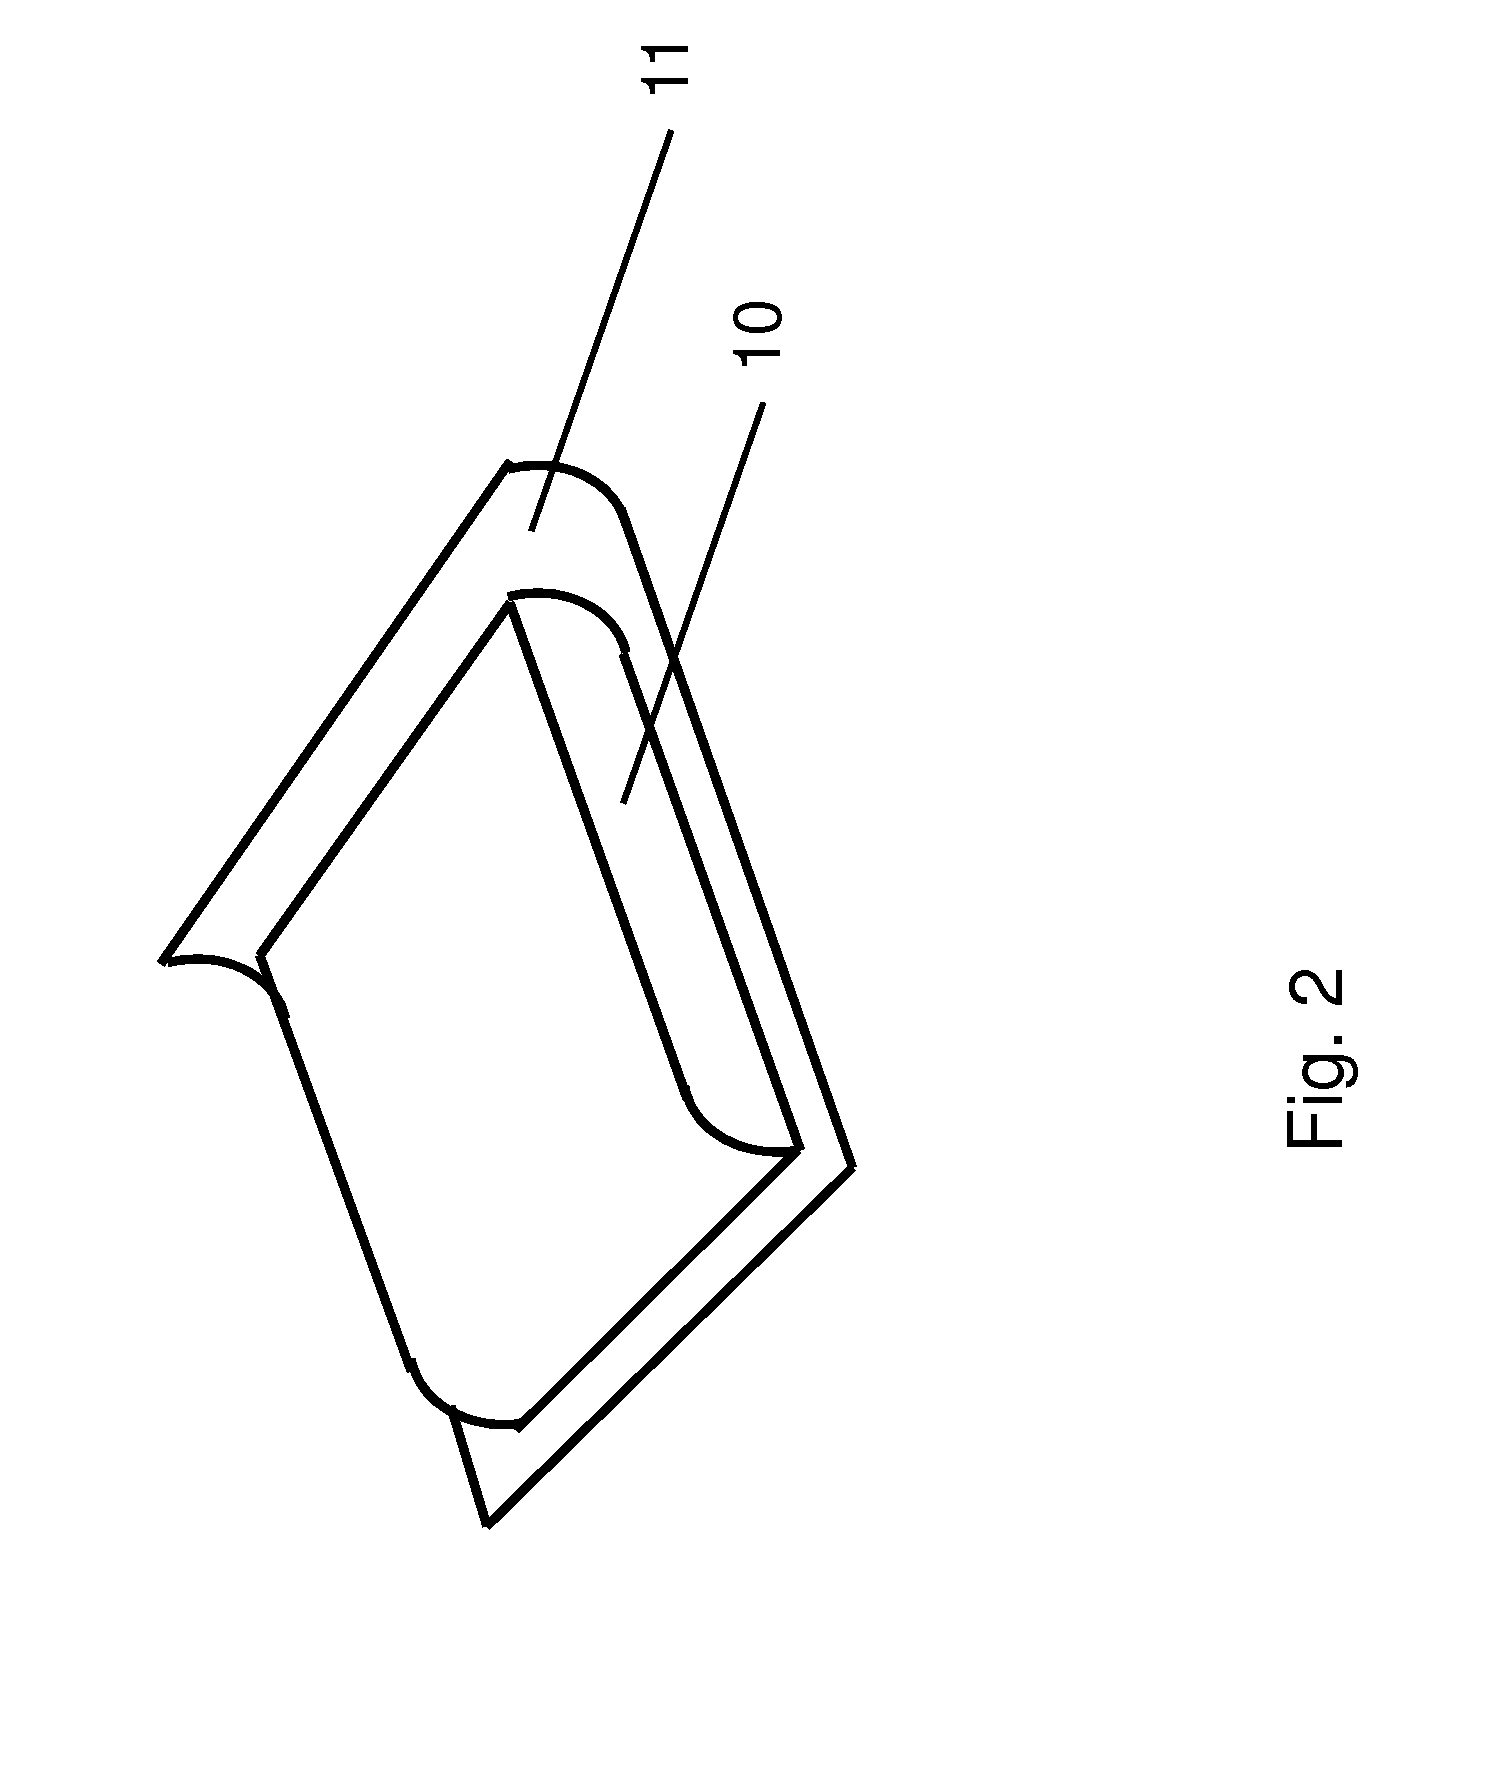 BRAZING METHOD FOR REINFORCING THE Z-NOTCH OF TiAl BLADES